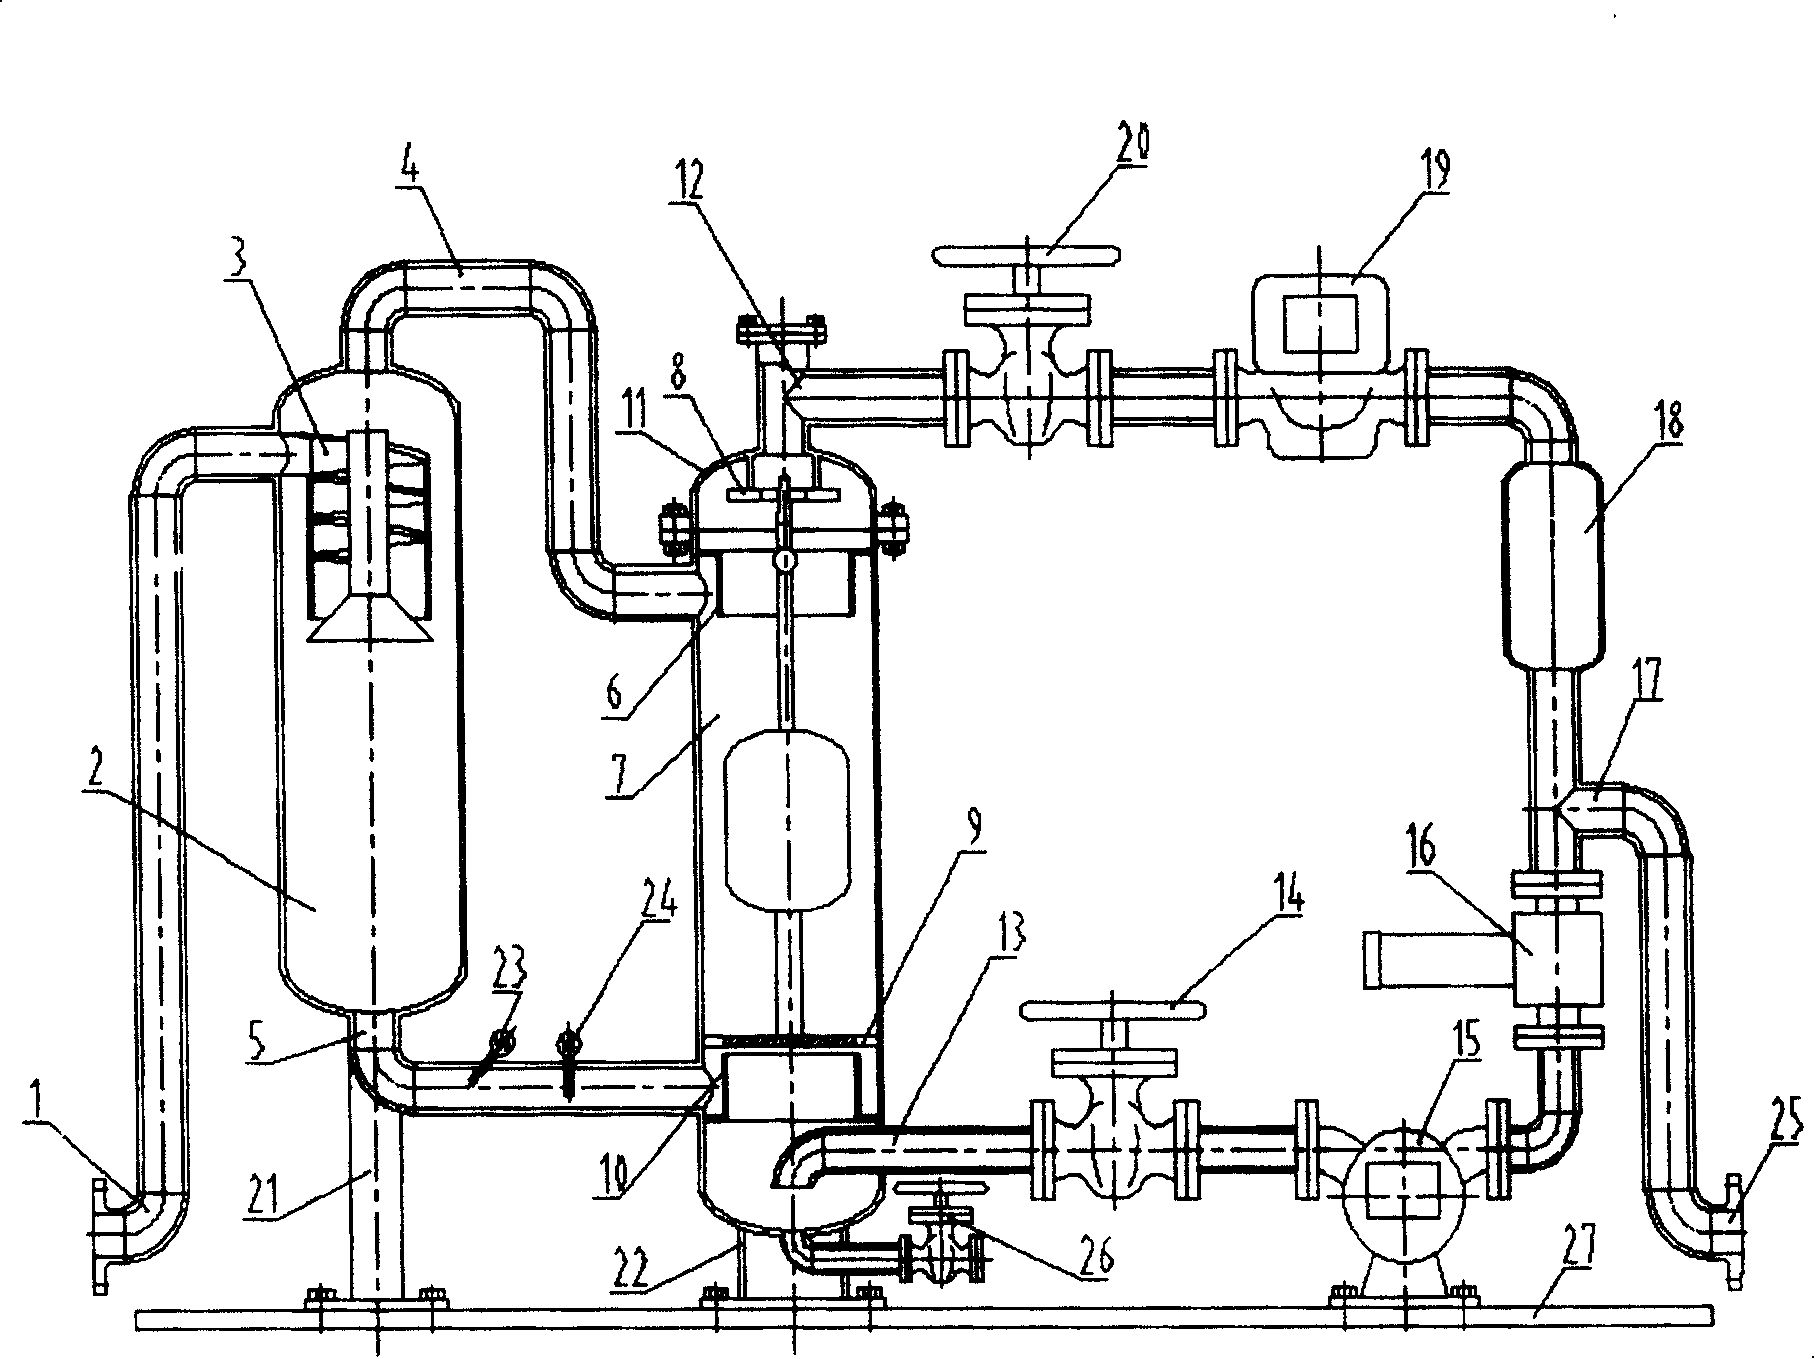 Automatic metering device for oil, water and gas three-phase flow